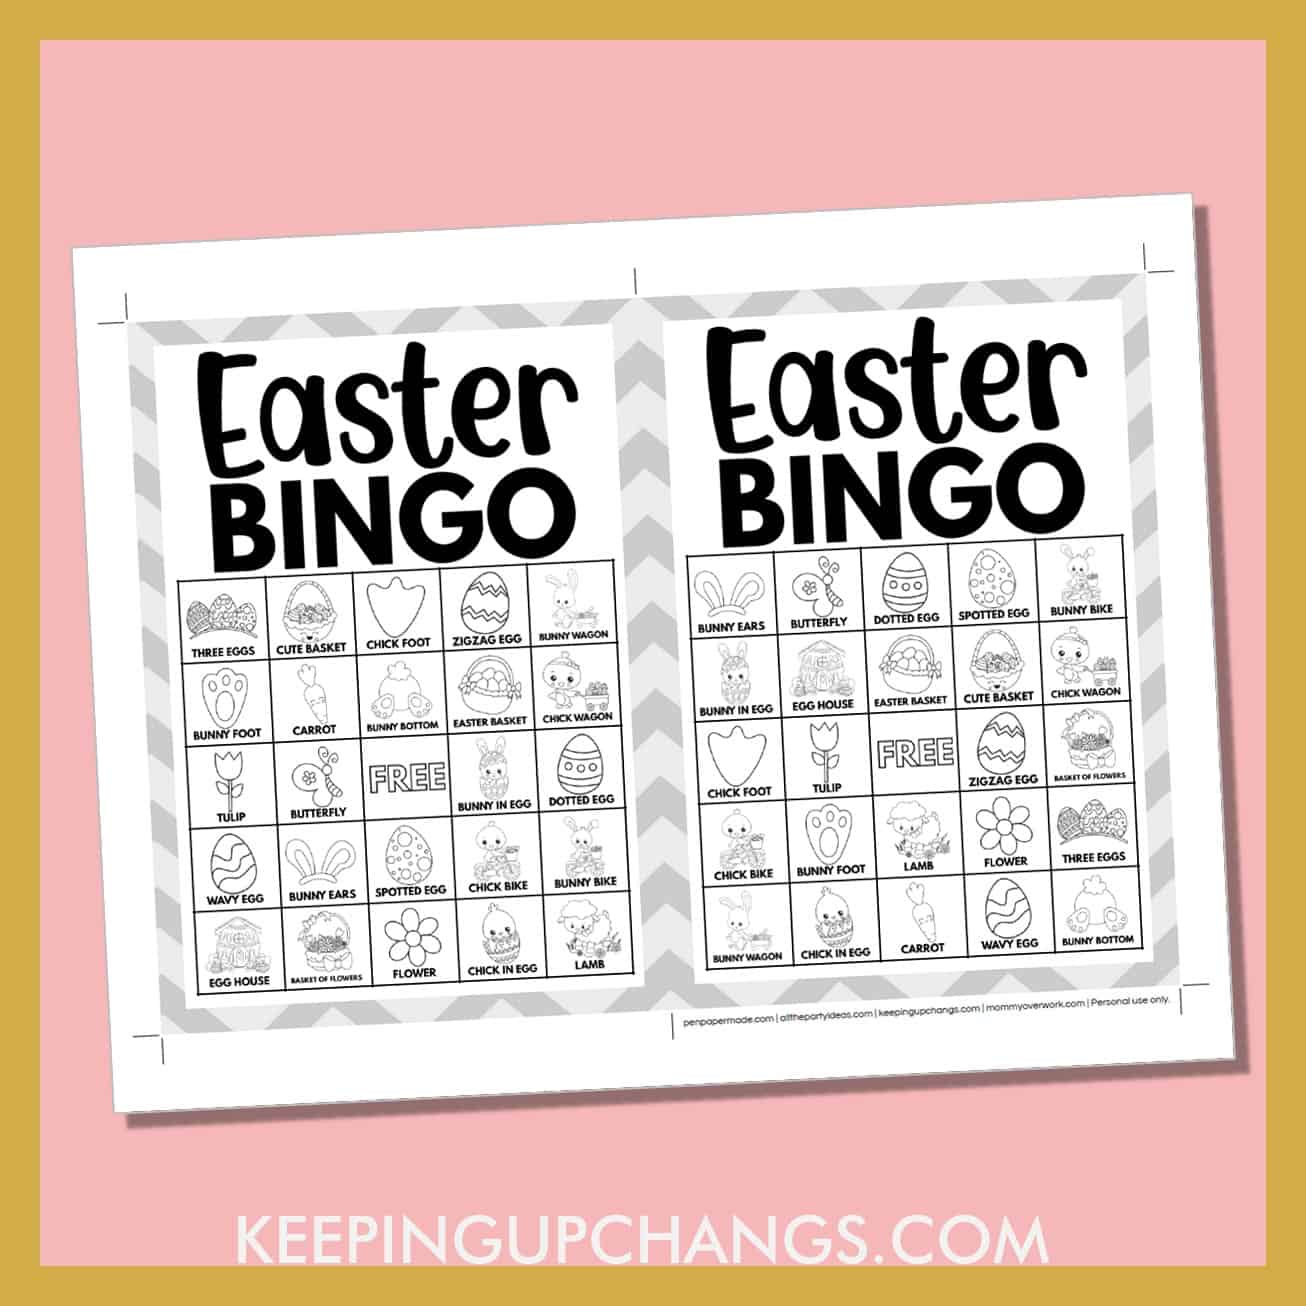 free easter bingo card 5x5 5x7 black white coloring game boards with images and text words.